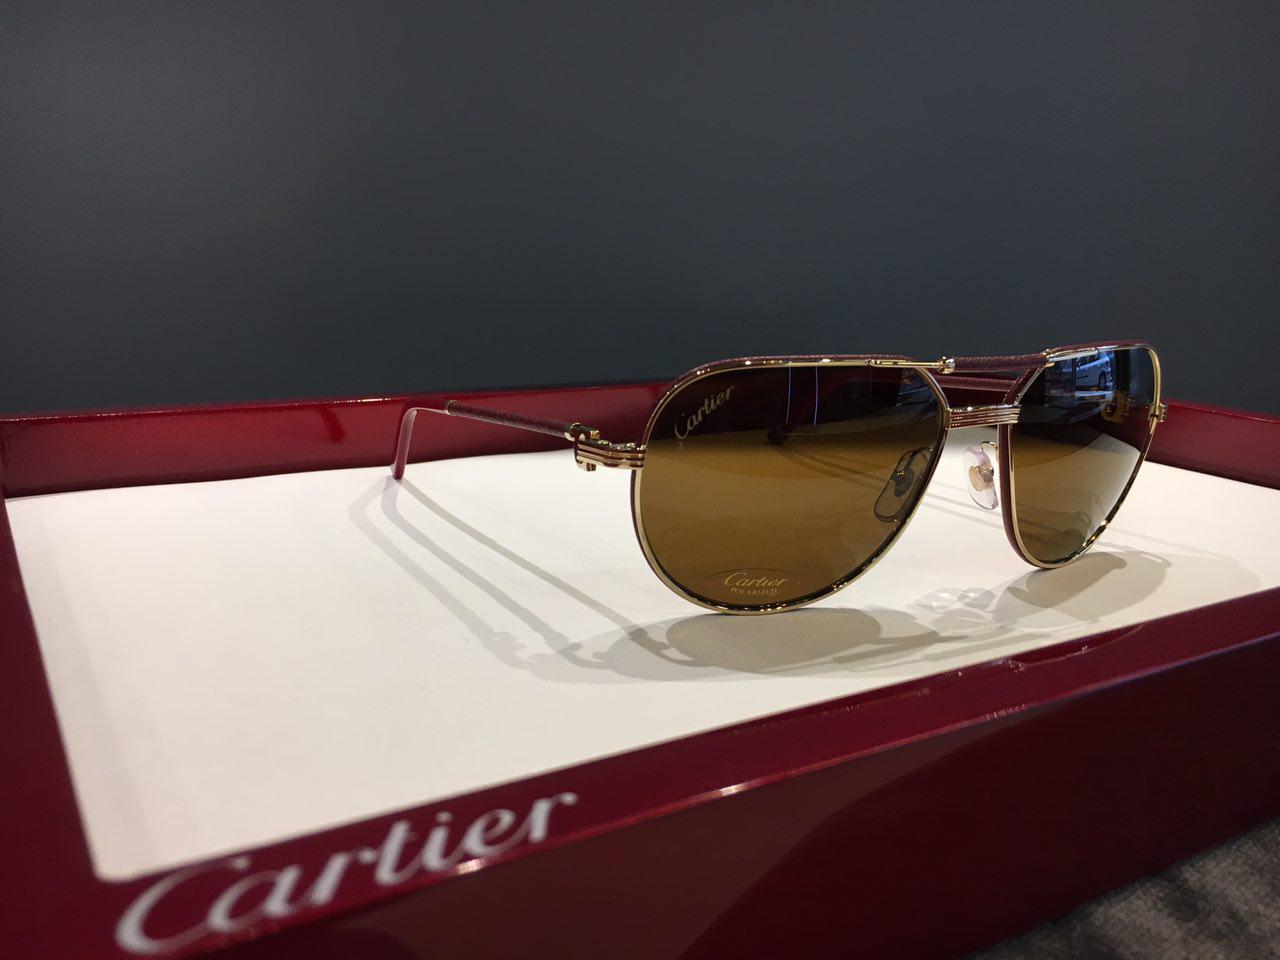 MUST DE CARTIER: Real leather, gold 